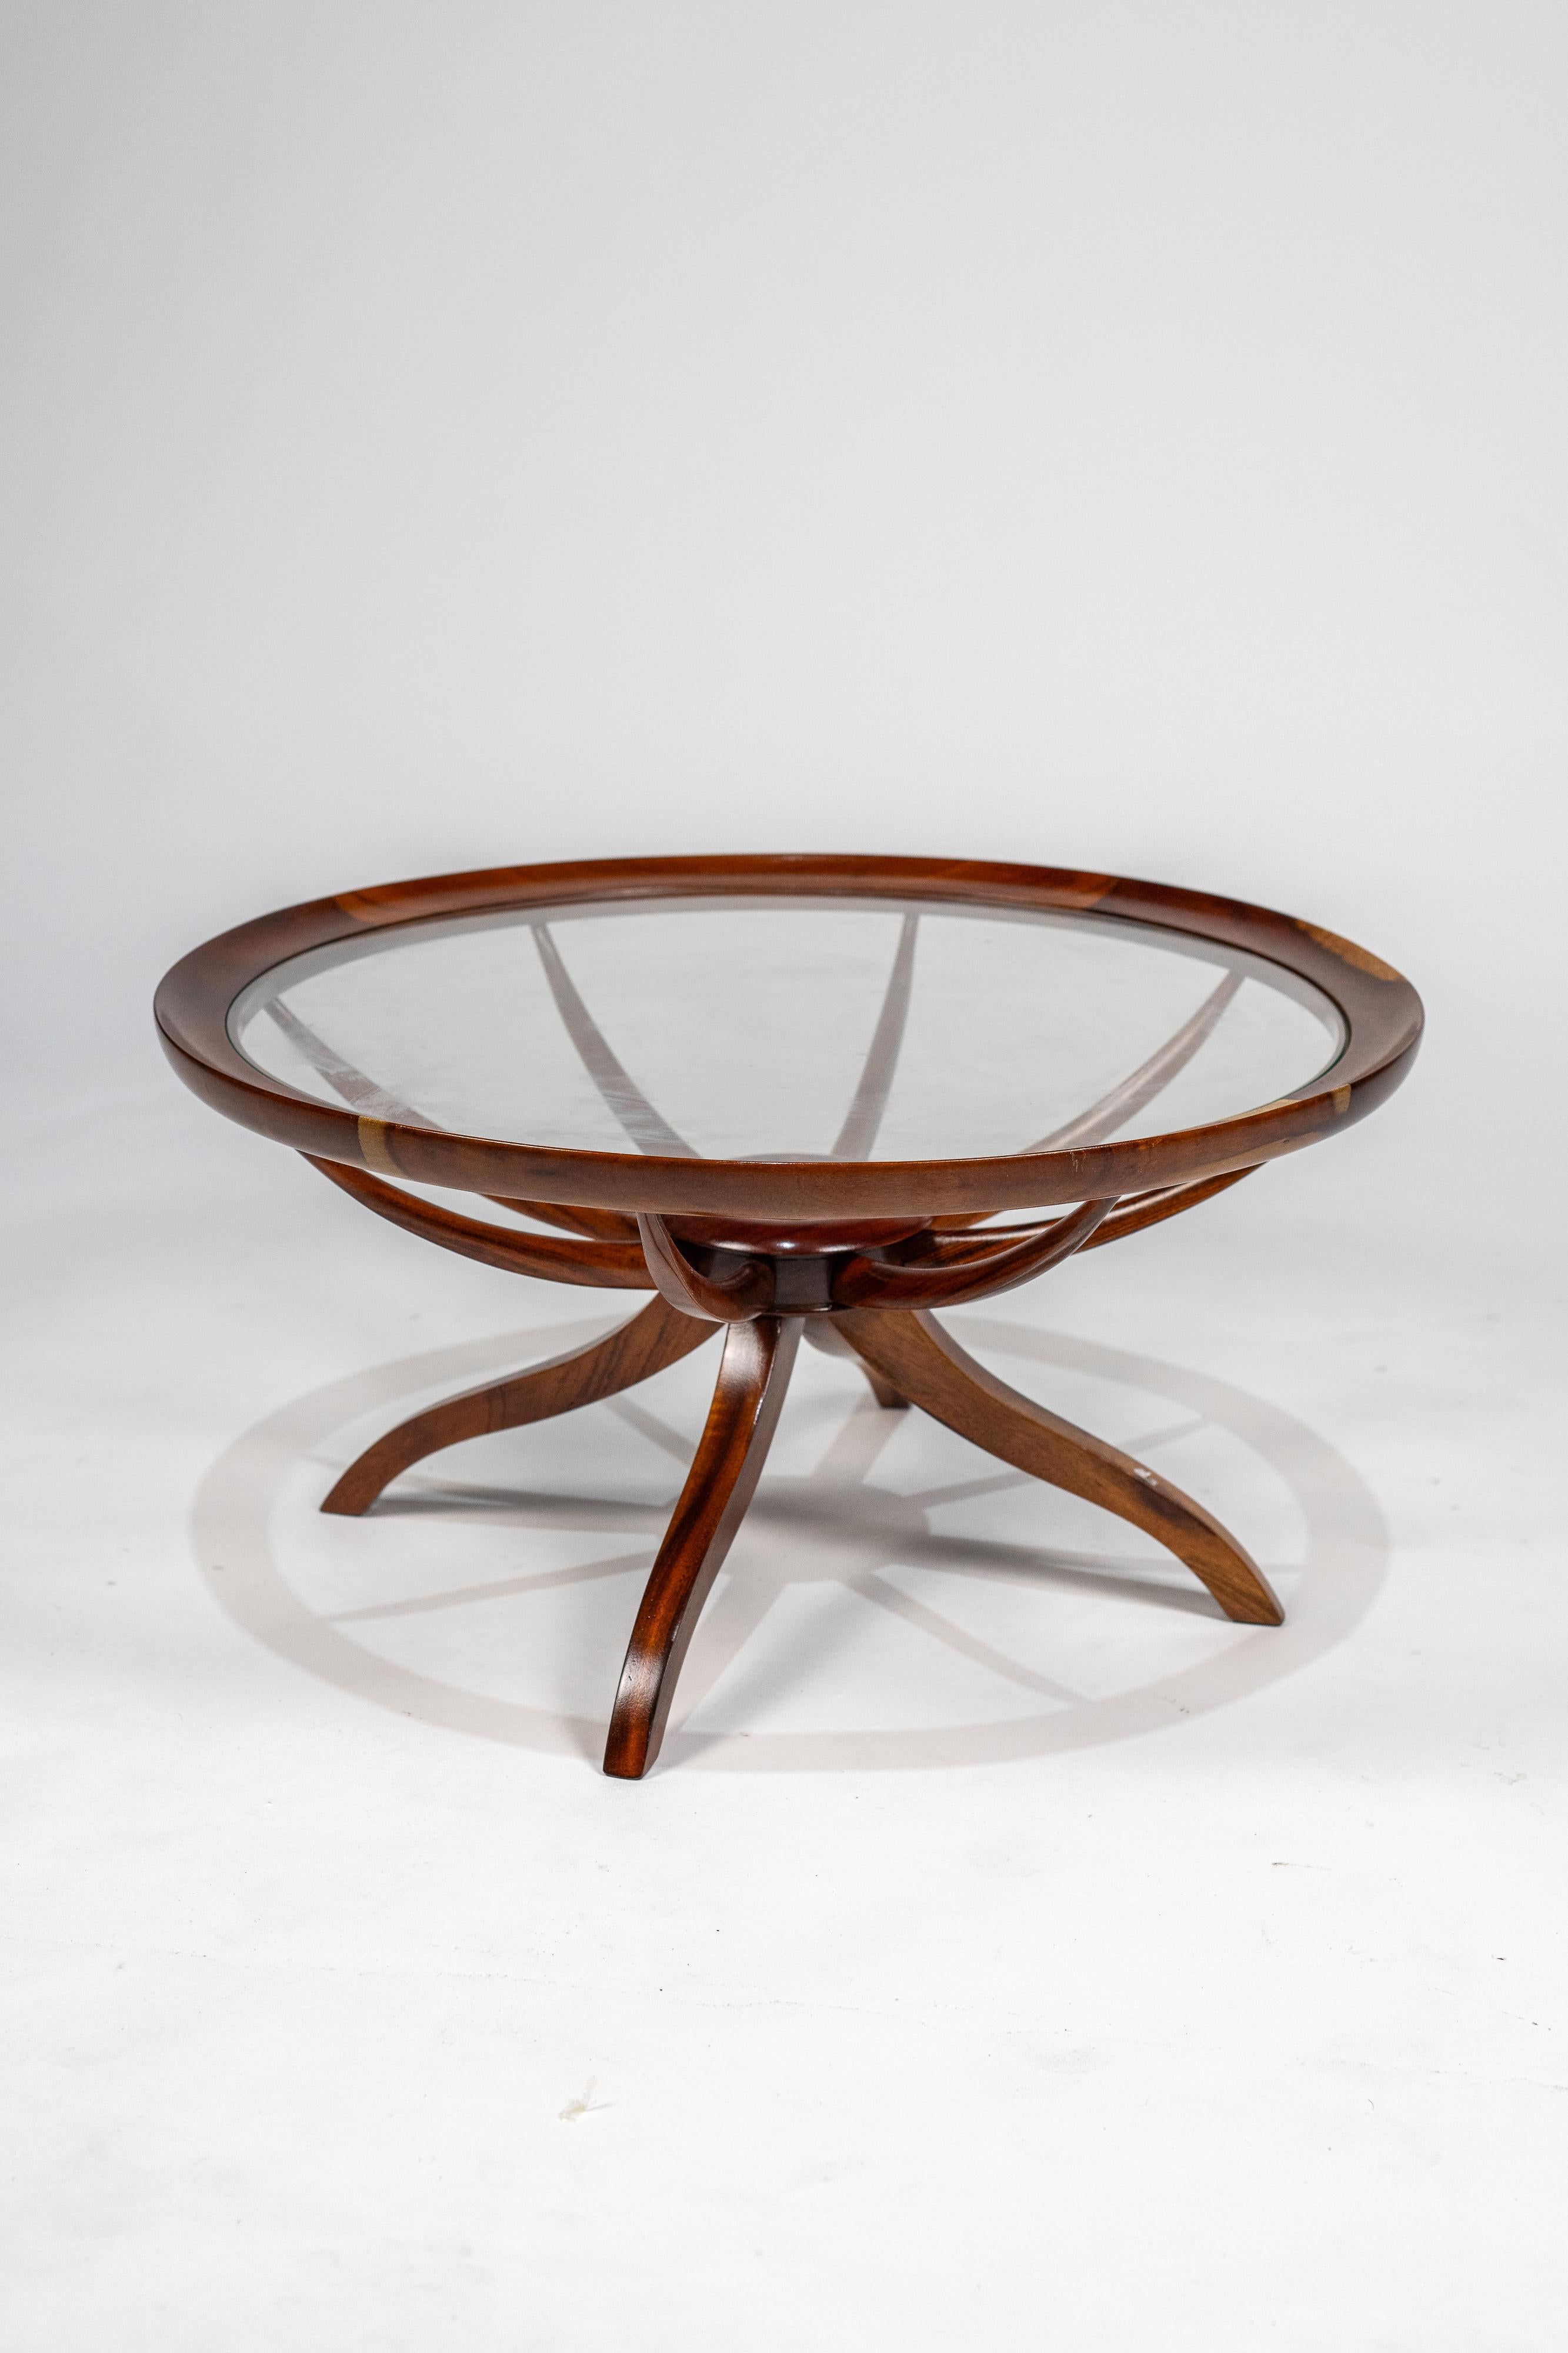 Giuseppe Scapinelli. Table basse 